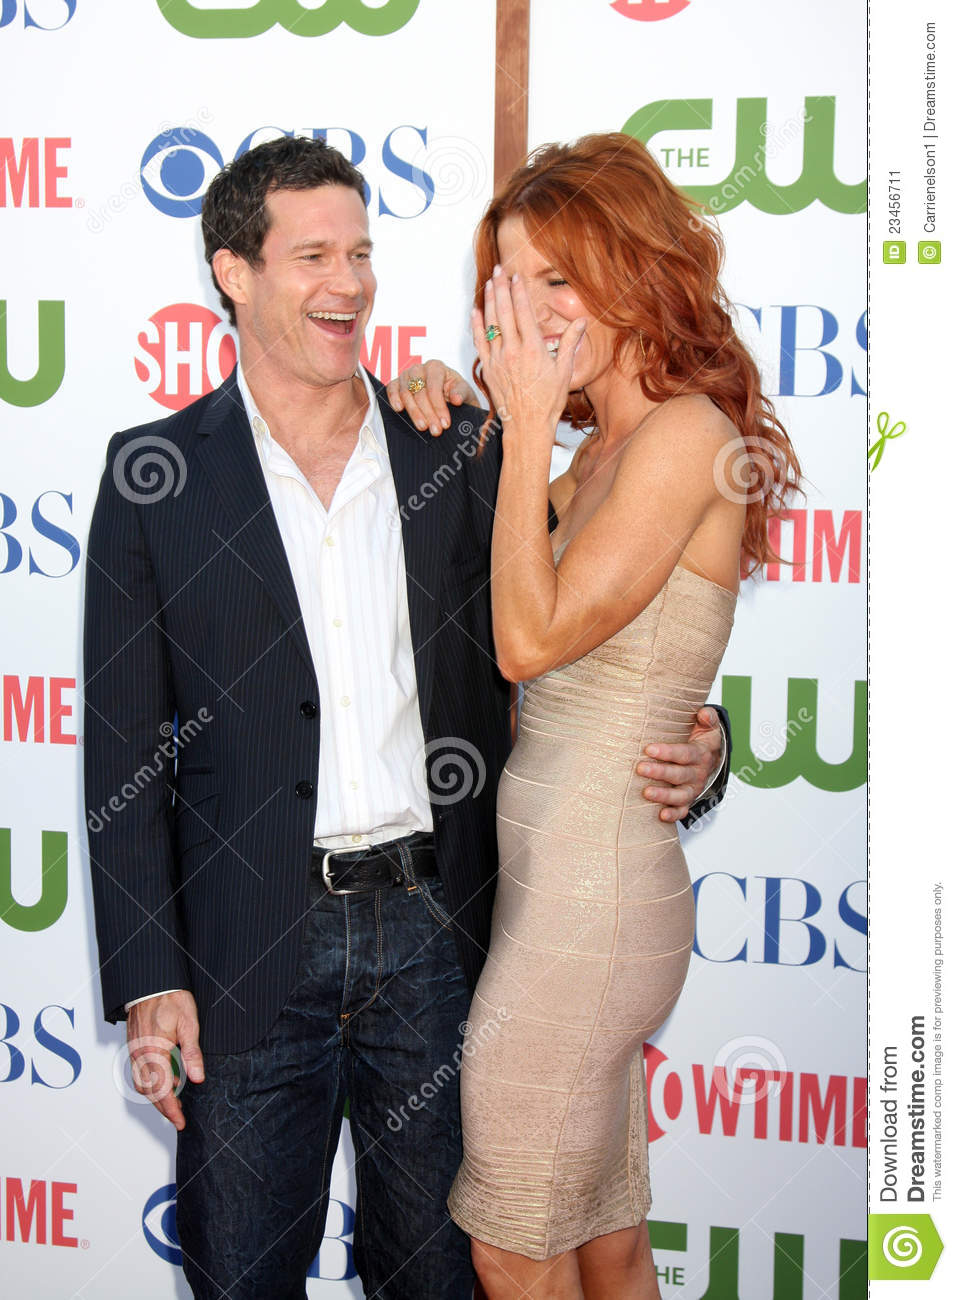 dylan-walsh-house